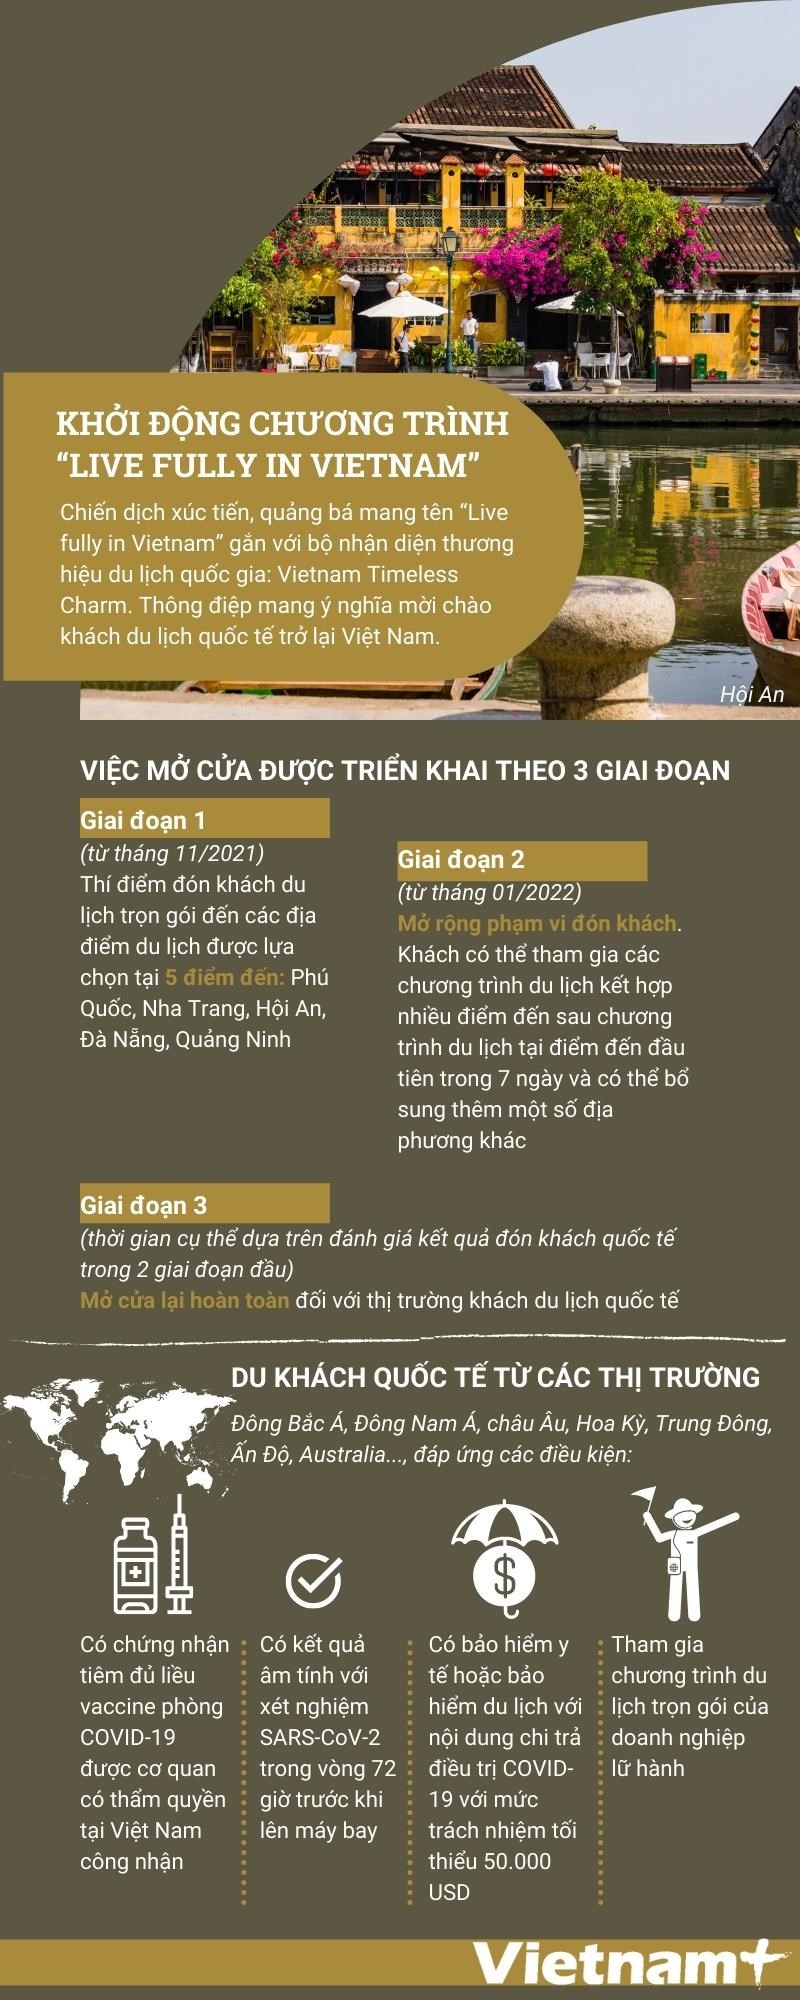 Khoi dong chuong trinh “Live fully in Vietnam” don du khach quoc te hinh anh 1